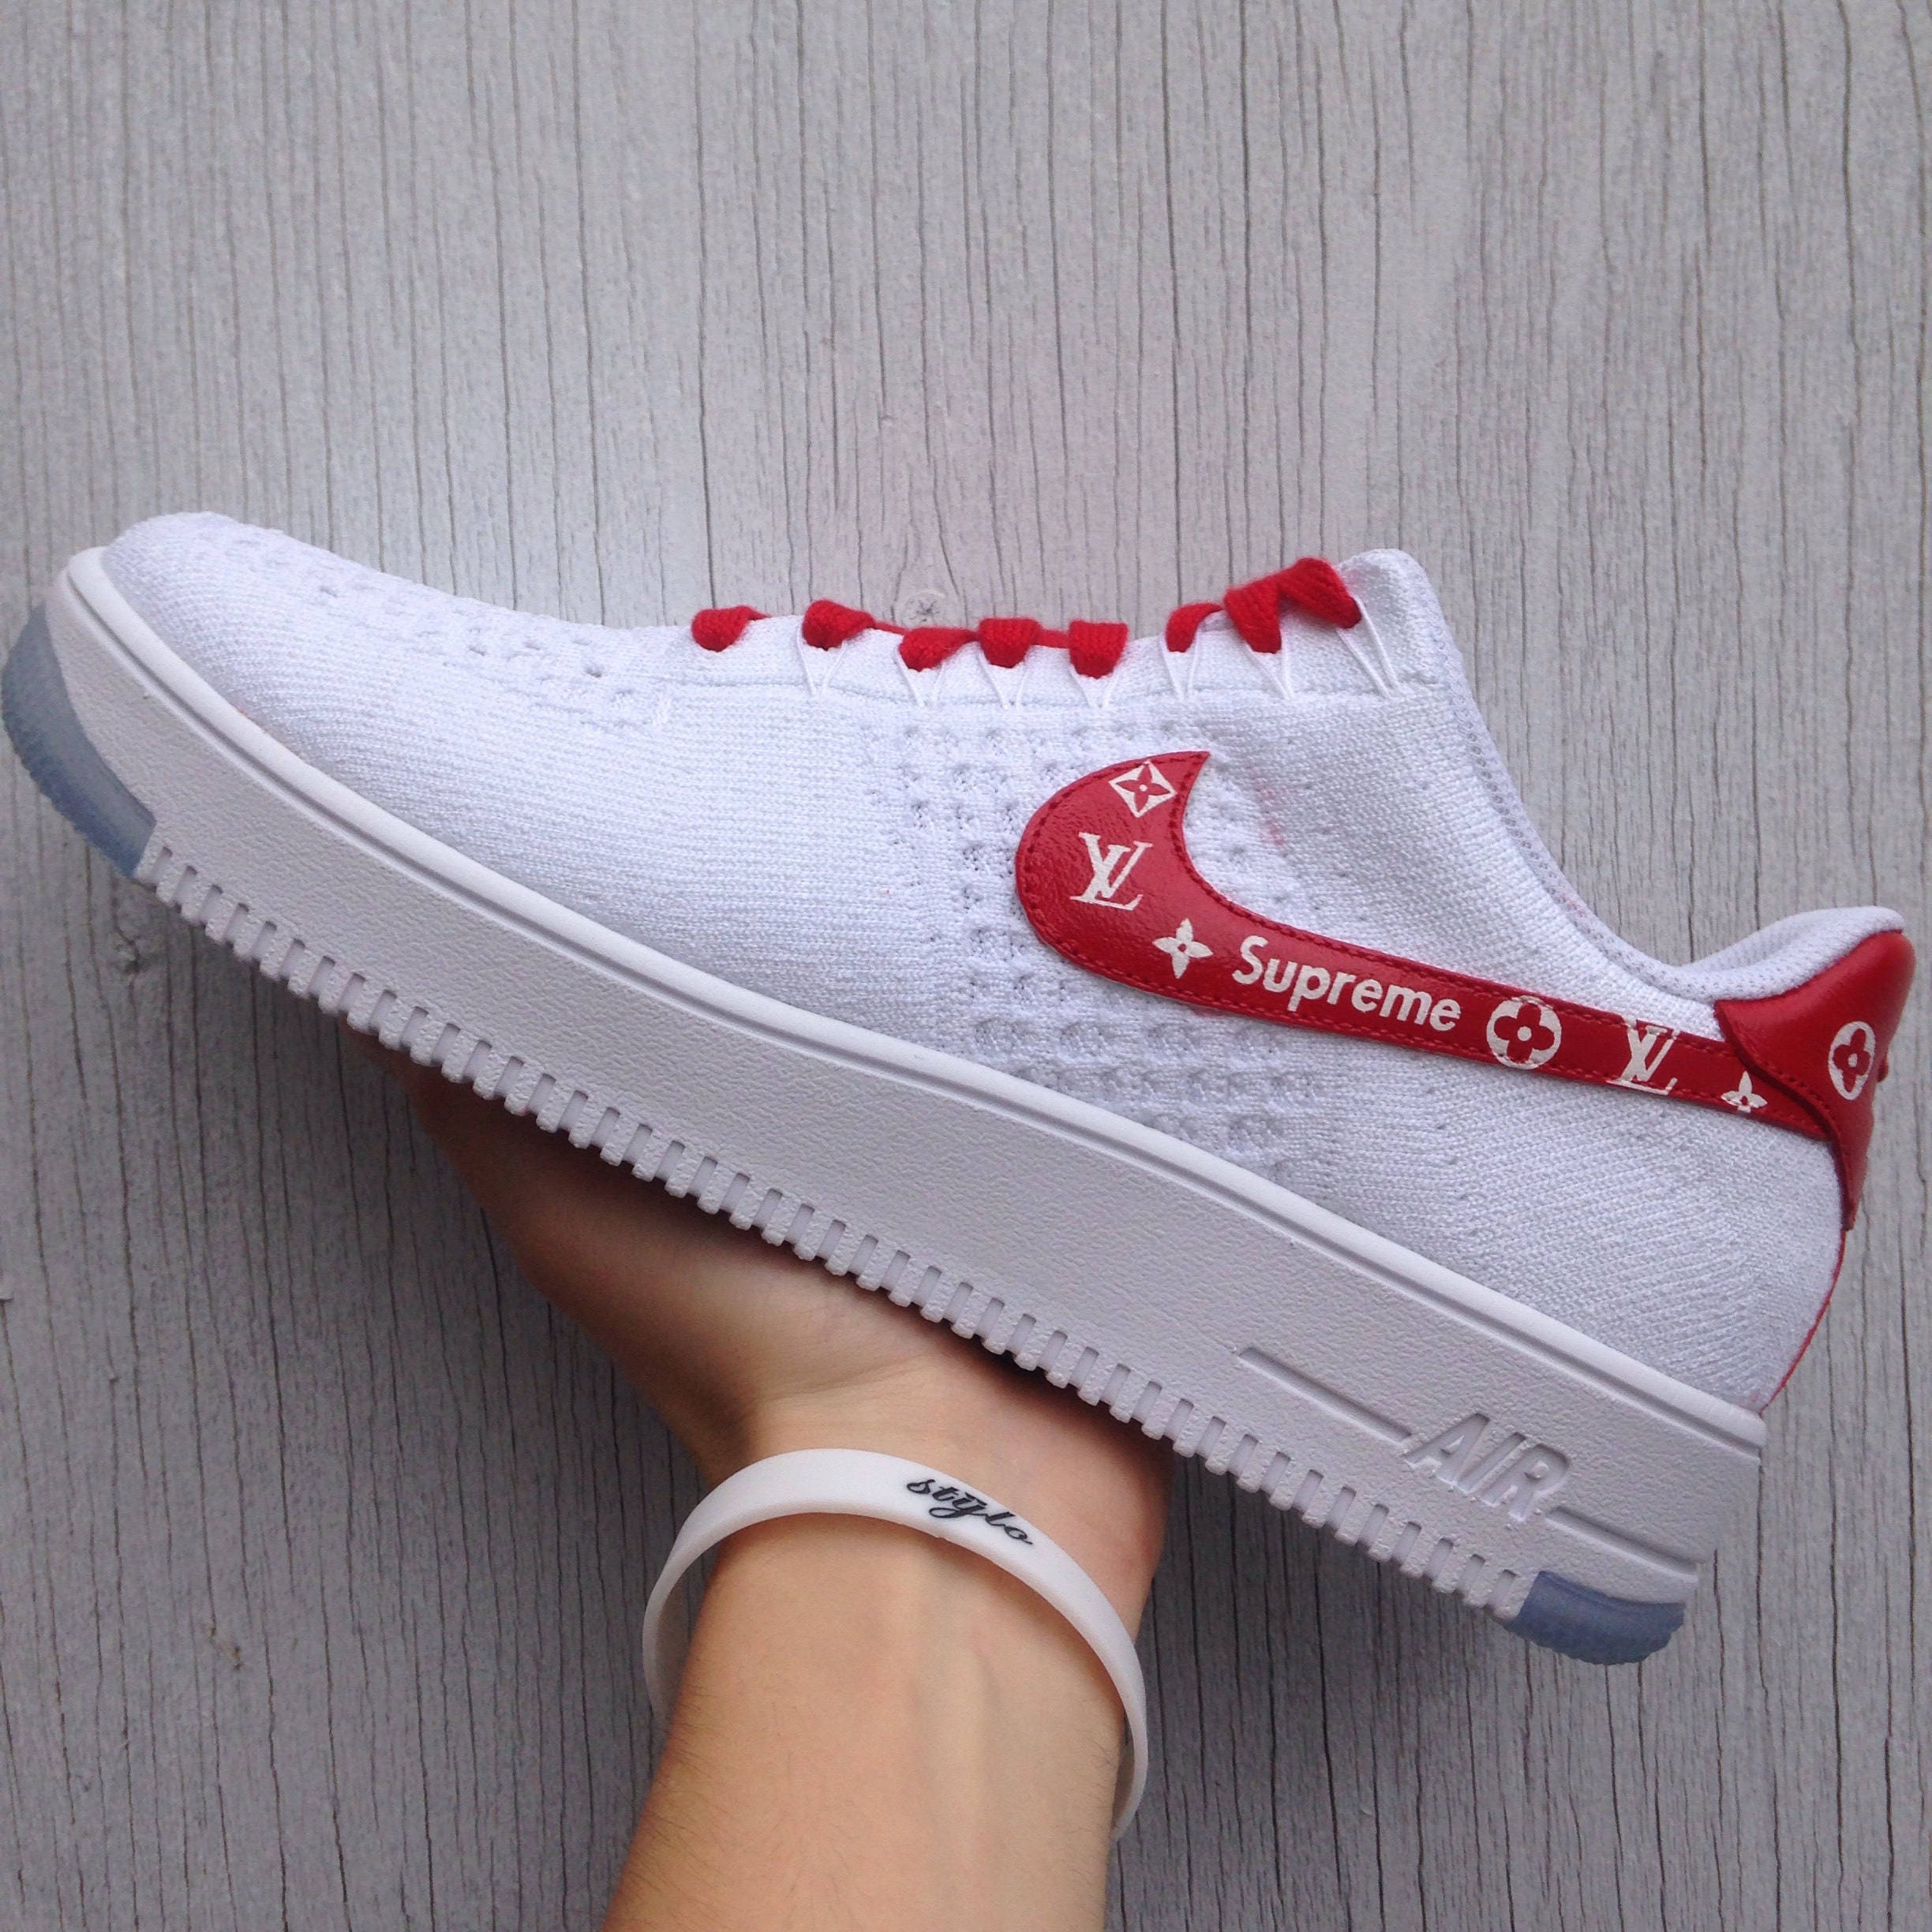 Custom Painted Nike Air Force 1 Ultra Flyknit Low LV X Supreme